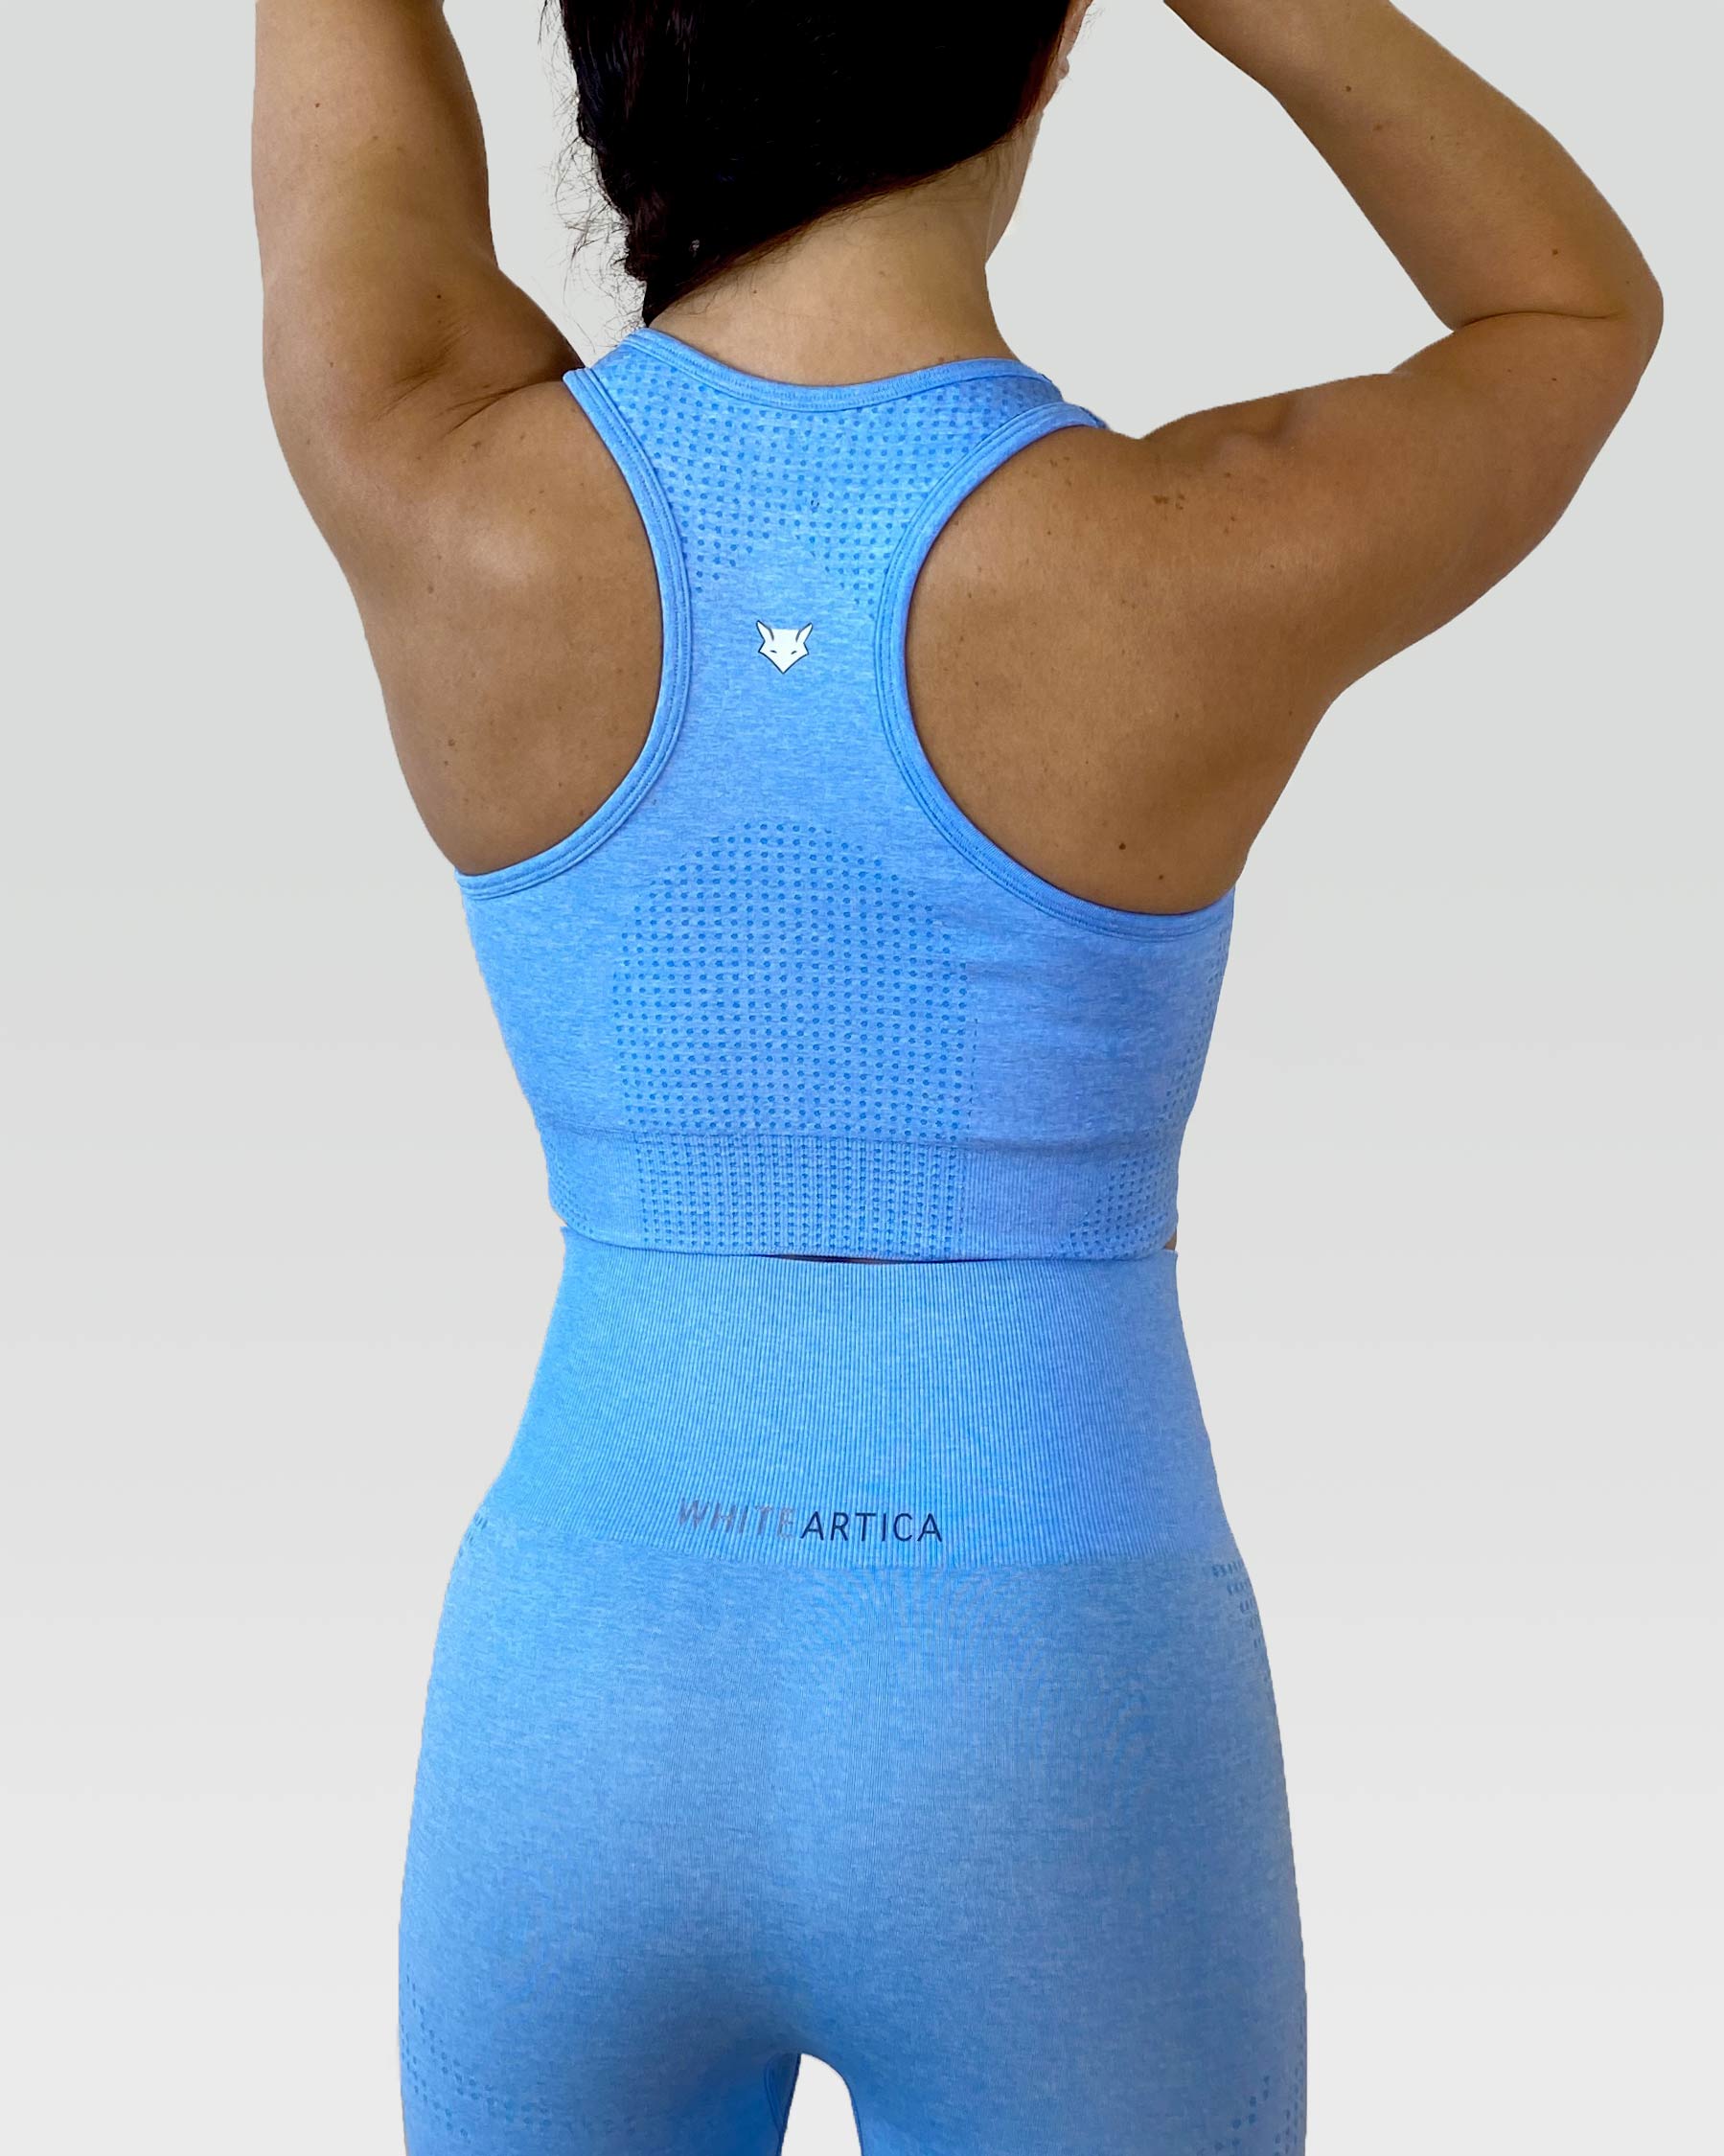 Australian woman wearing white artica high-waisted exercise pants and leggings activewear for her light blue activewear workout fitness cloths